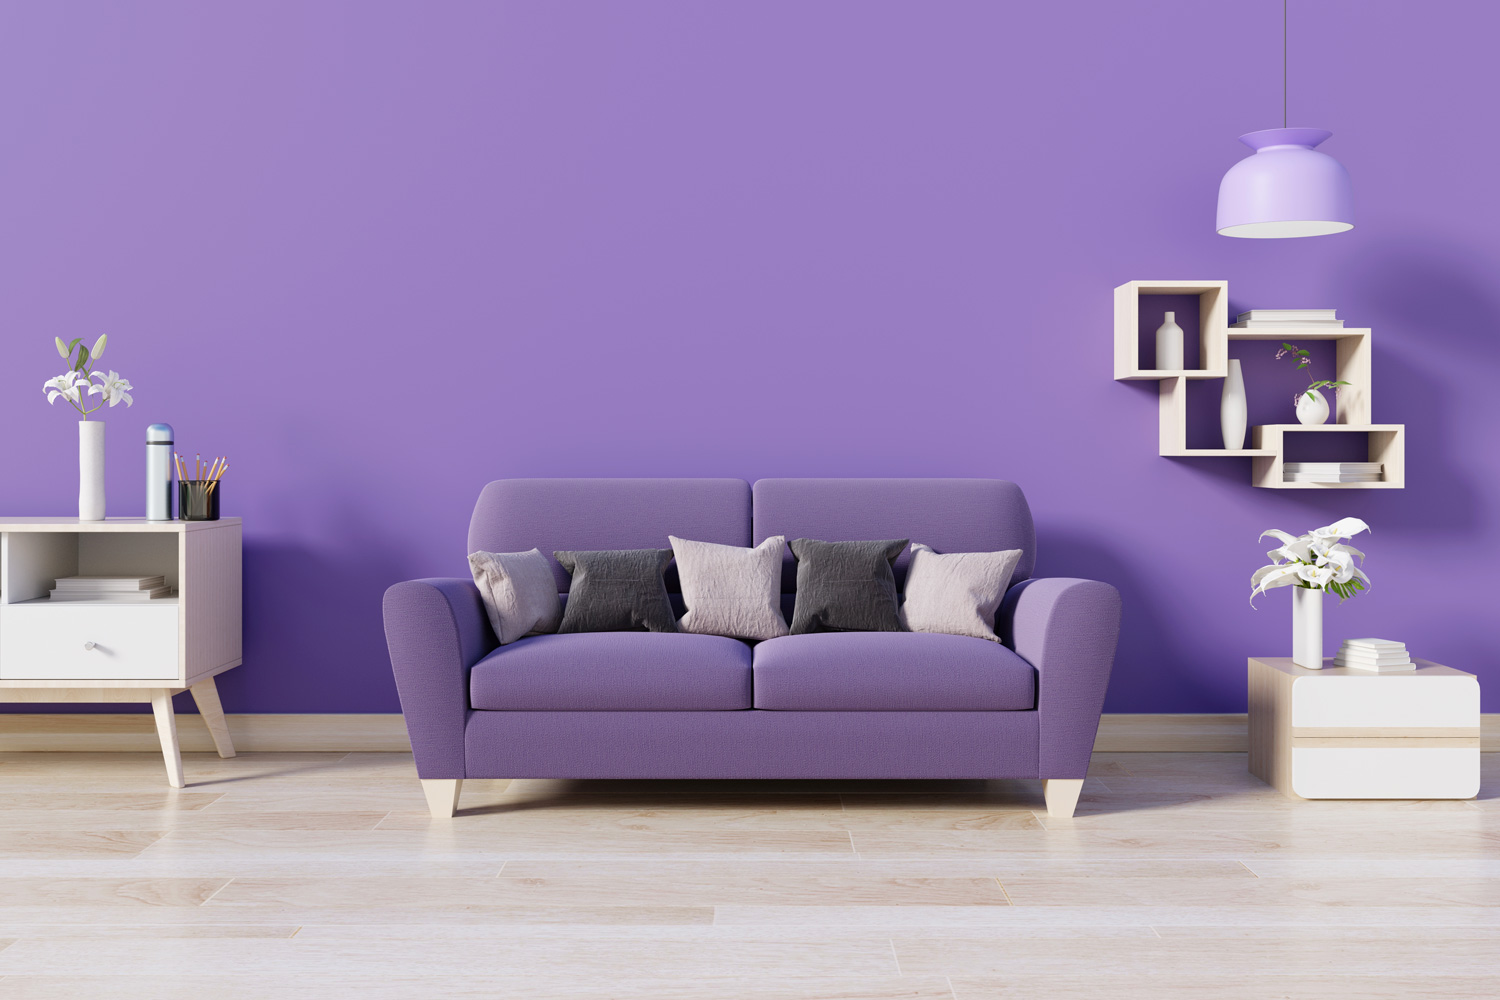 Modern room have purple sofa in open space with lamp and cabinet have wall ultra violet color of the year 